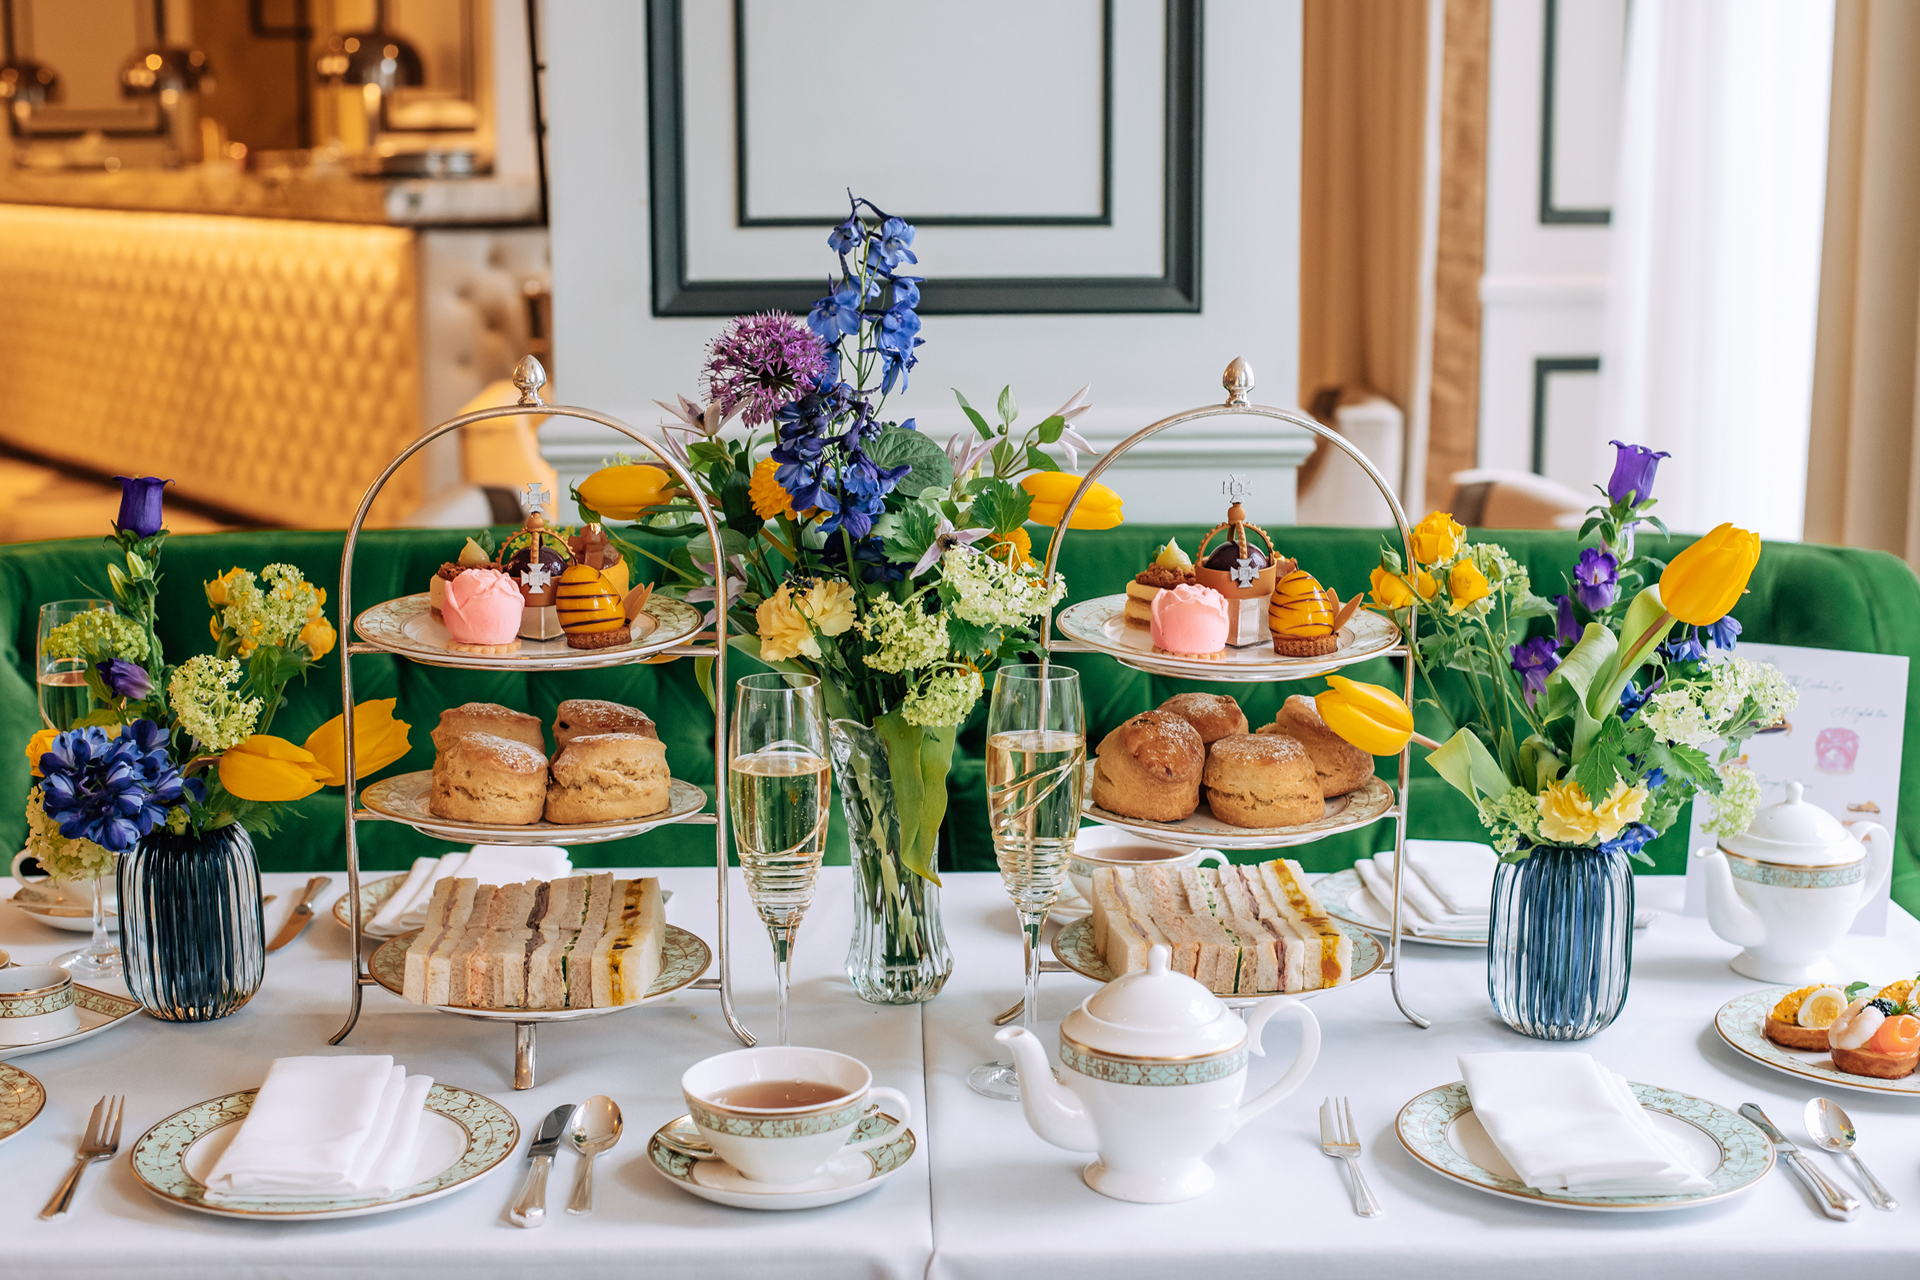 A table of afternoon tea dishes at Grosvenor House